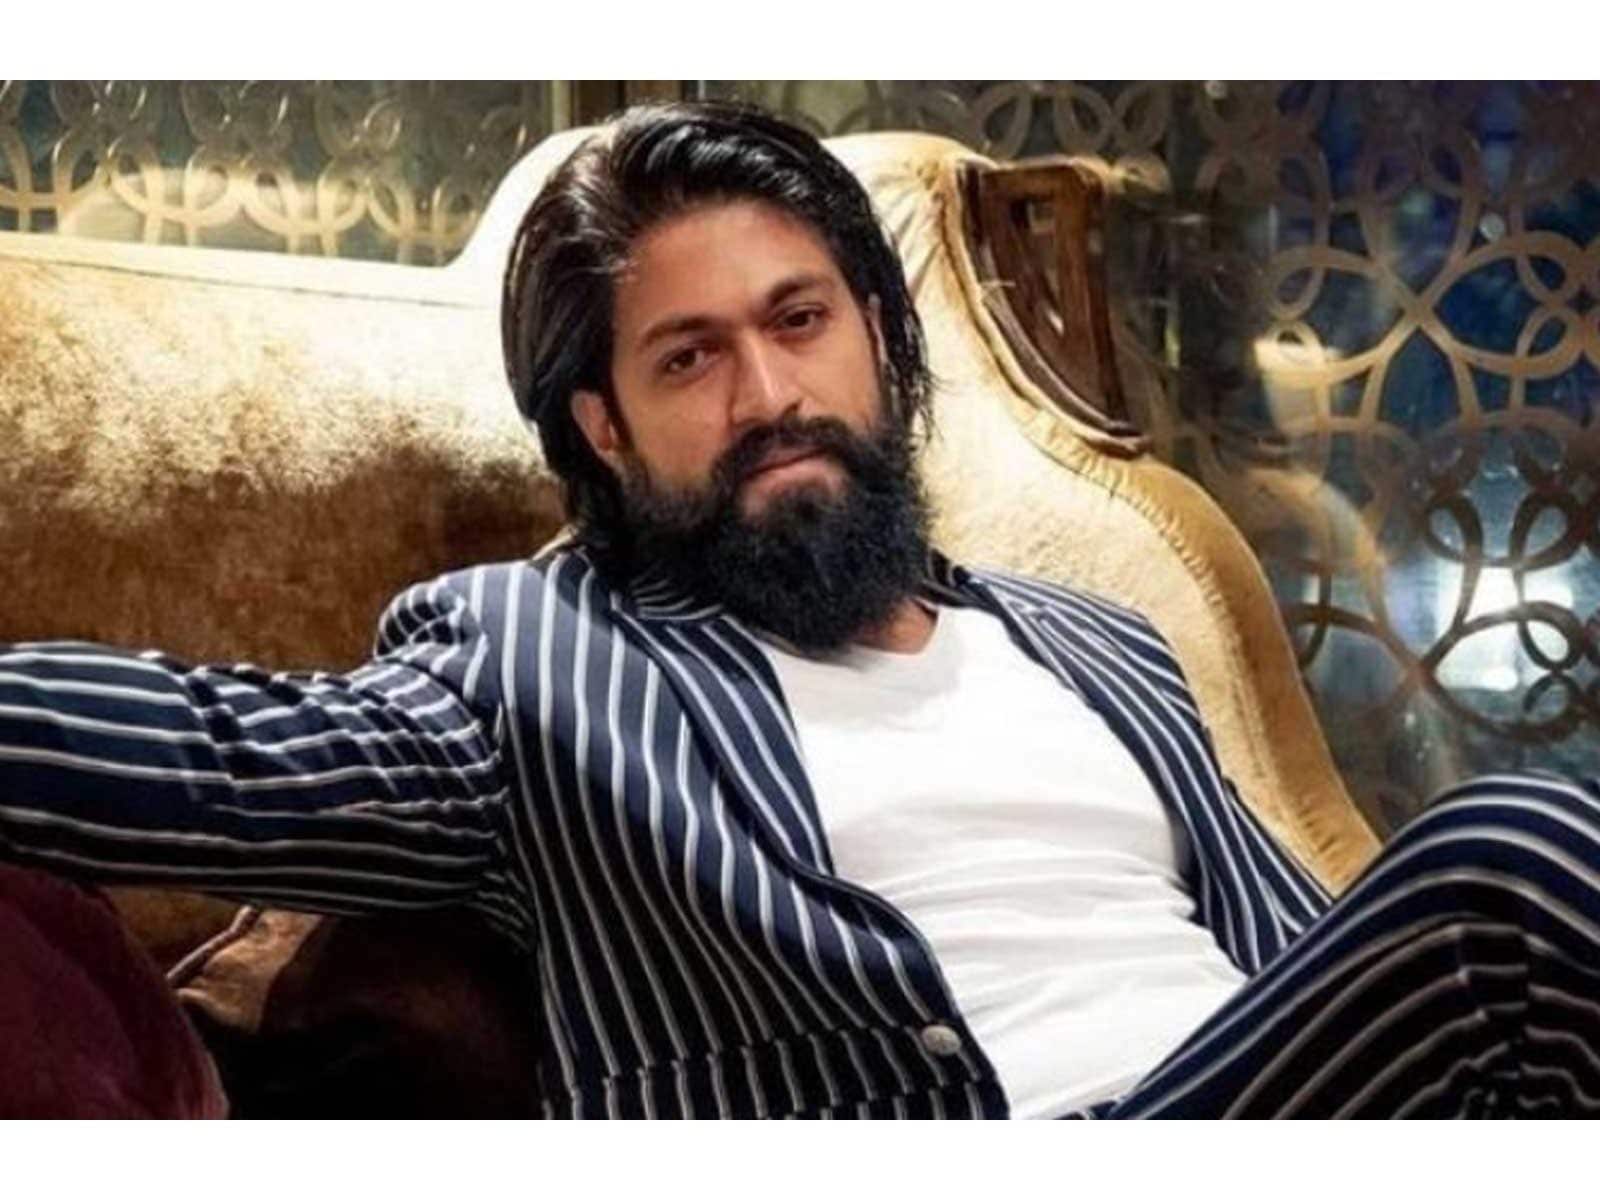 The producer who told about the release of KGF 3 on Hero yash's birthday